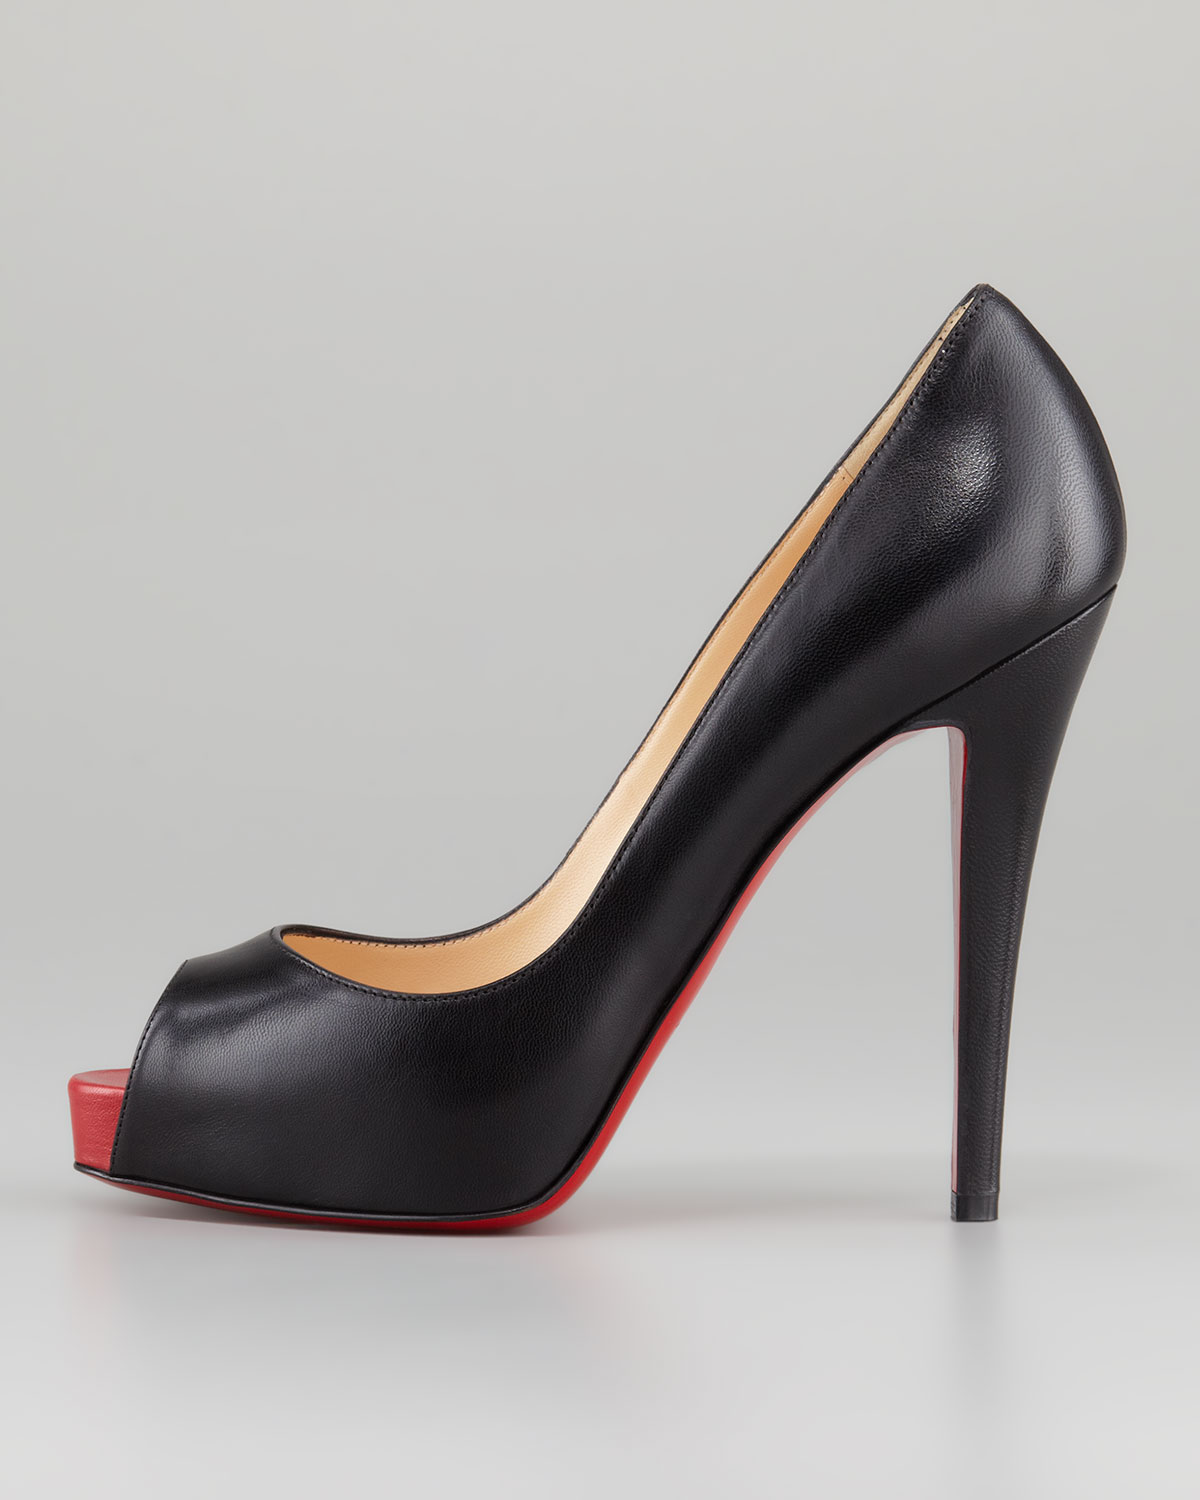 Christian Louboutin Very Prive Leather Platform Red Sole Pump Black in Black (BLACK/RED) | Lyst